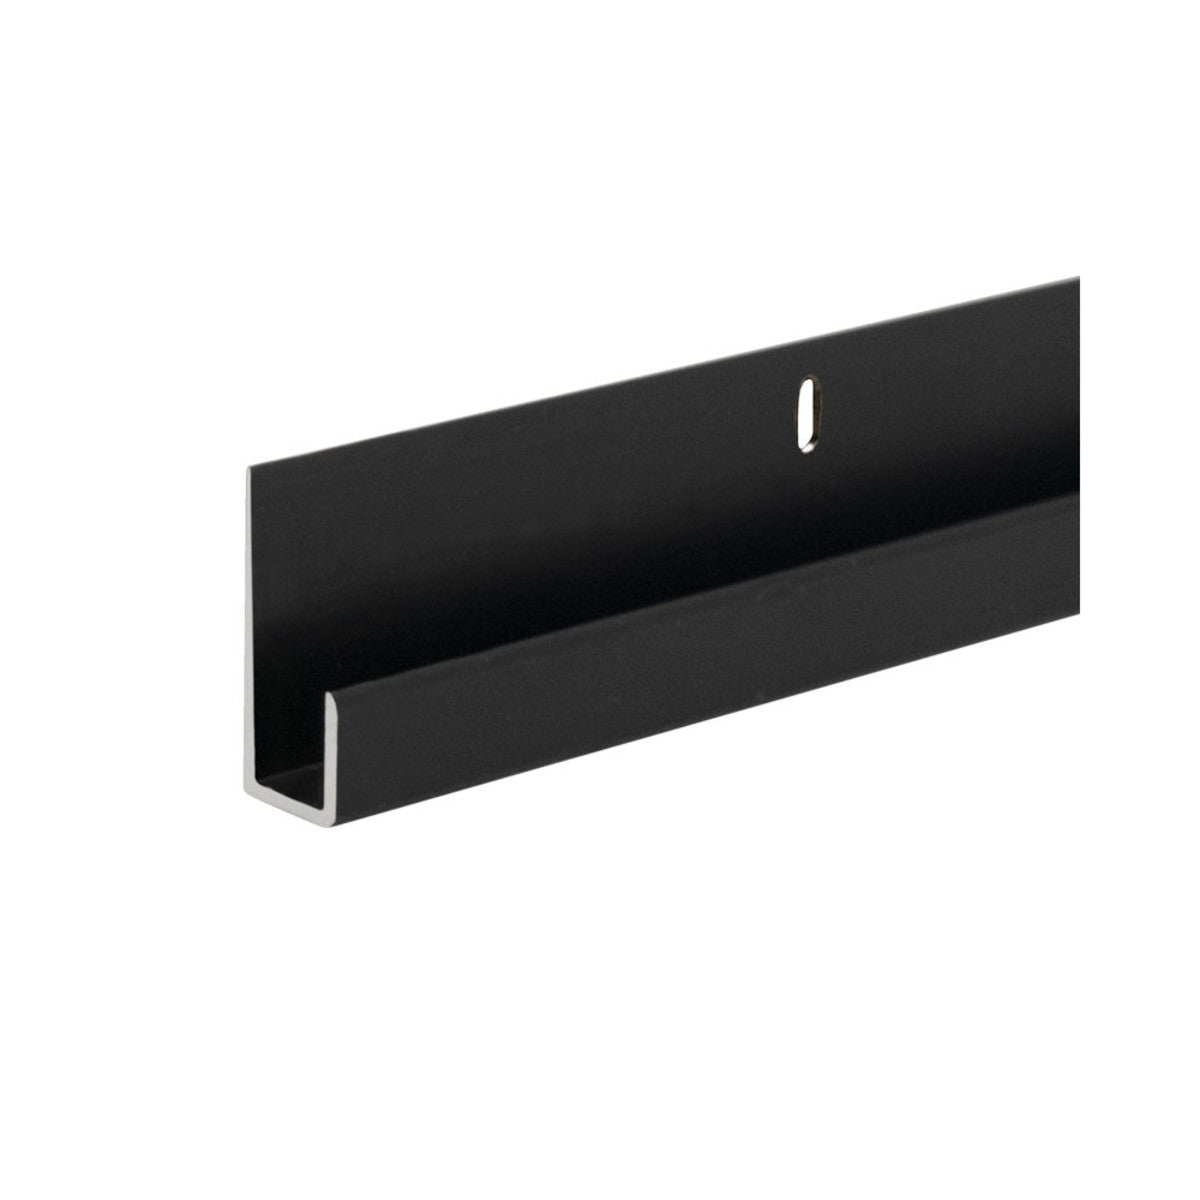 Black Anodized Aluminum J Channel (3/8) for 1/4 Mirror Support 95